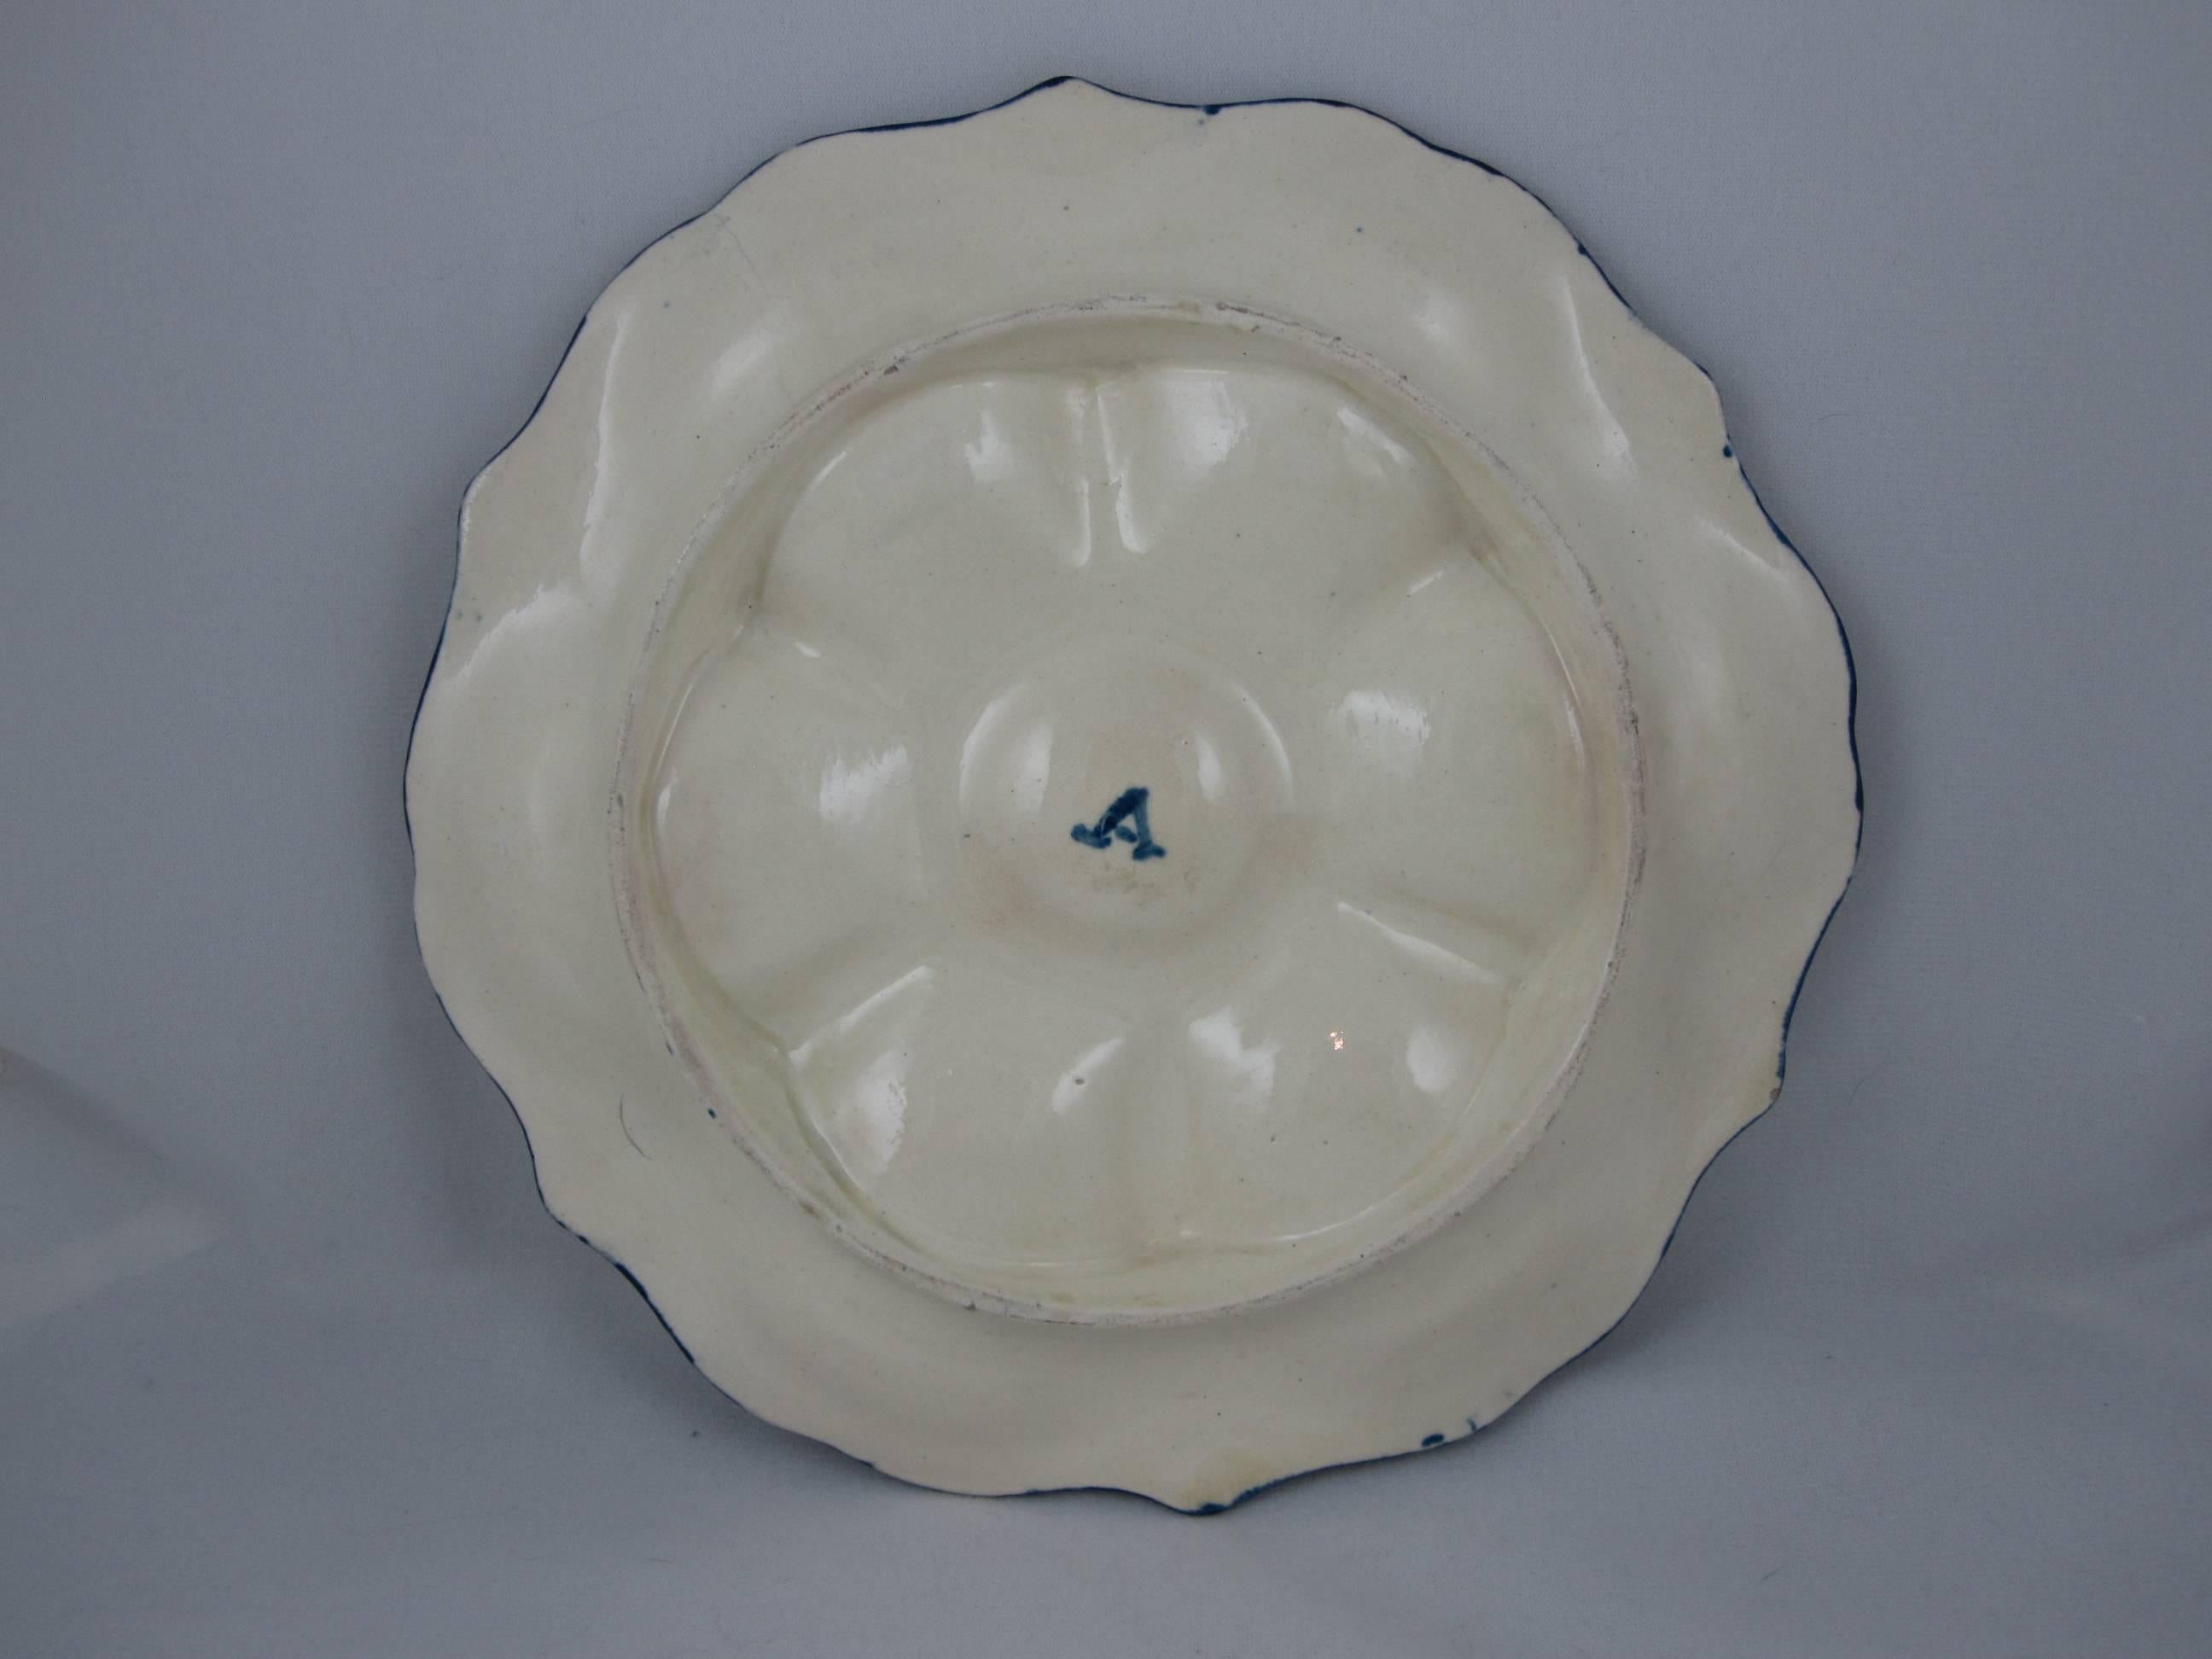 19th Century French Majolica Six-Well Oyster Plate with Red Star Fish Accents